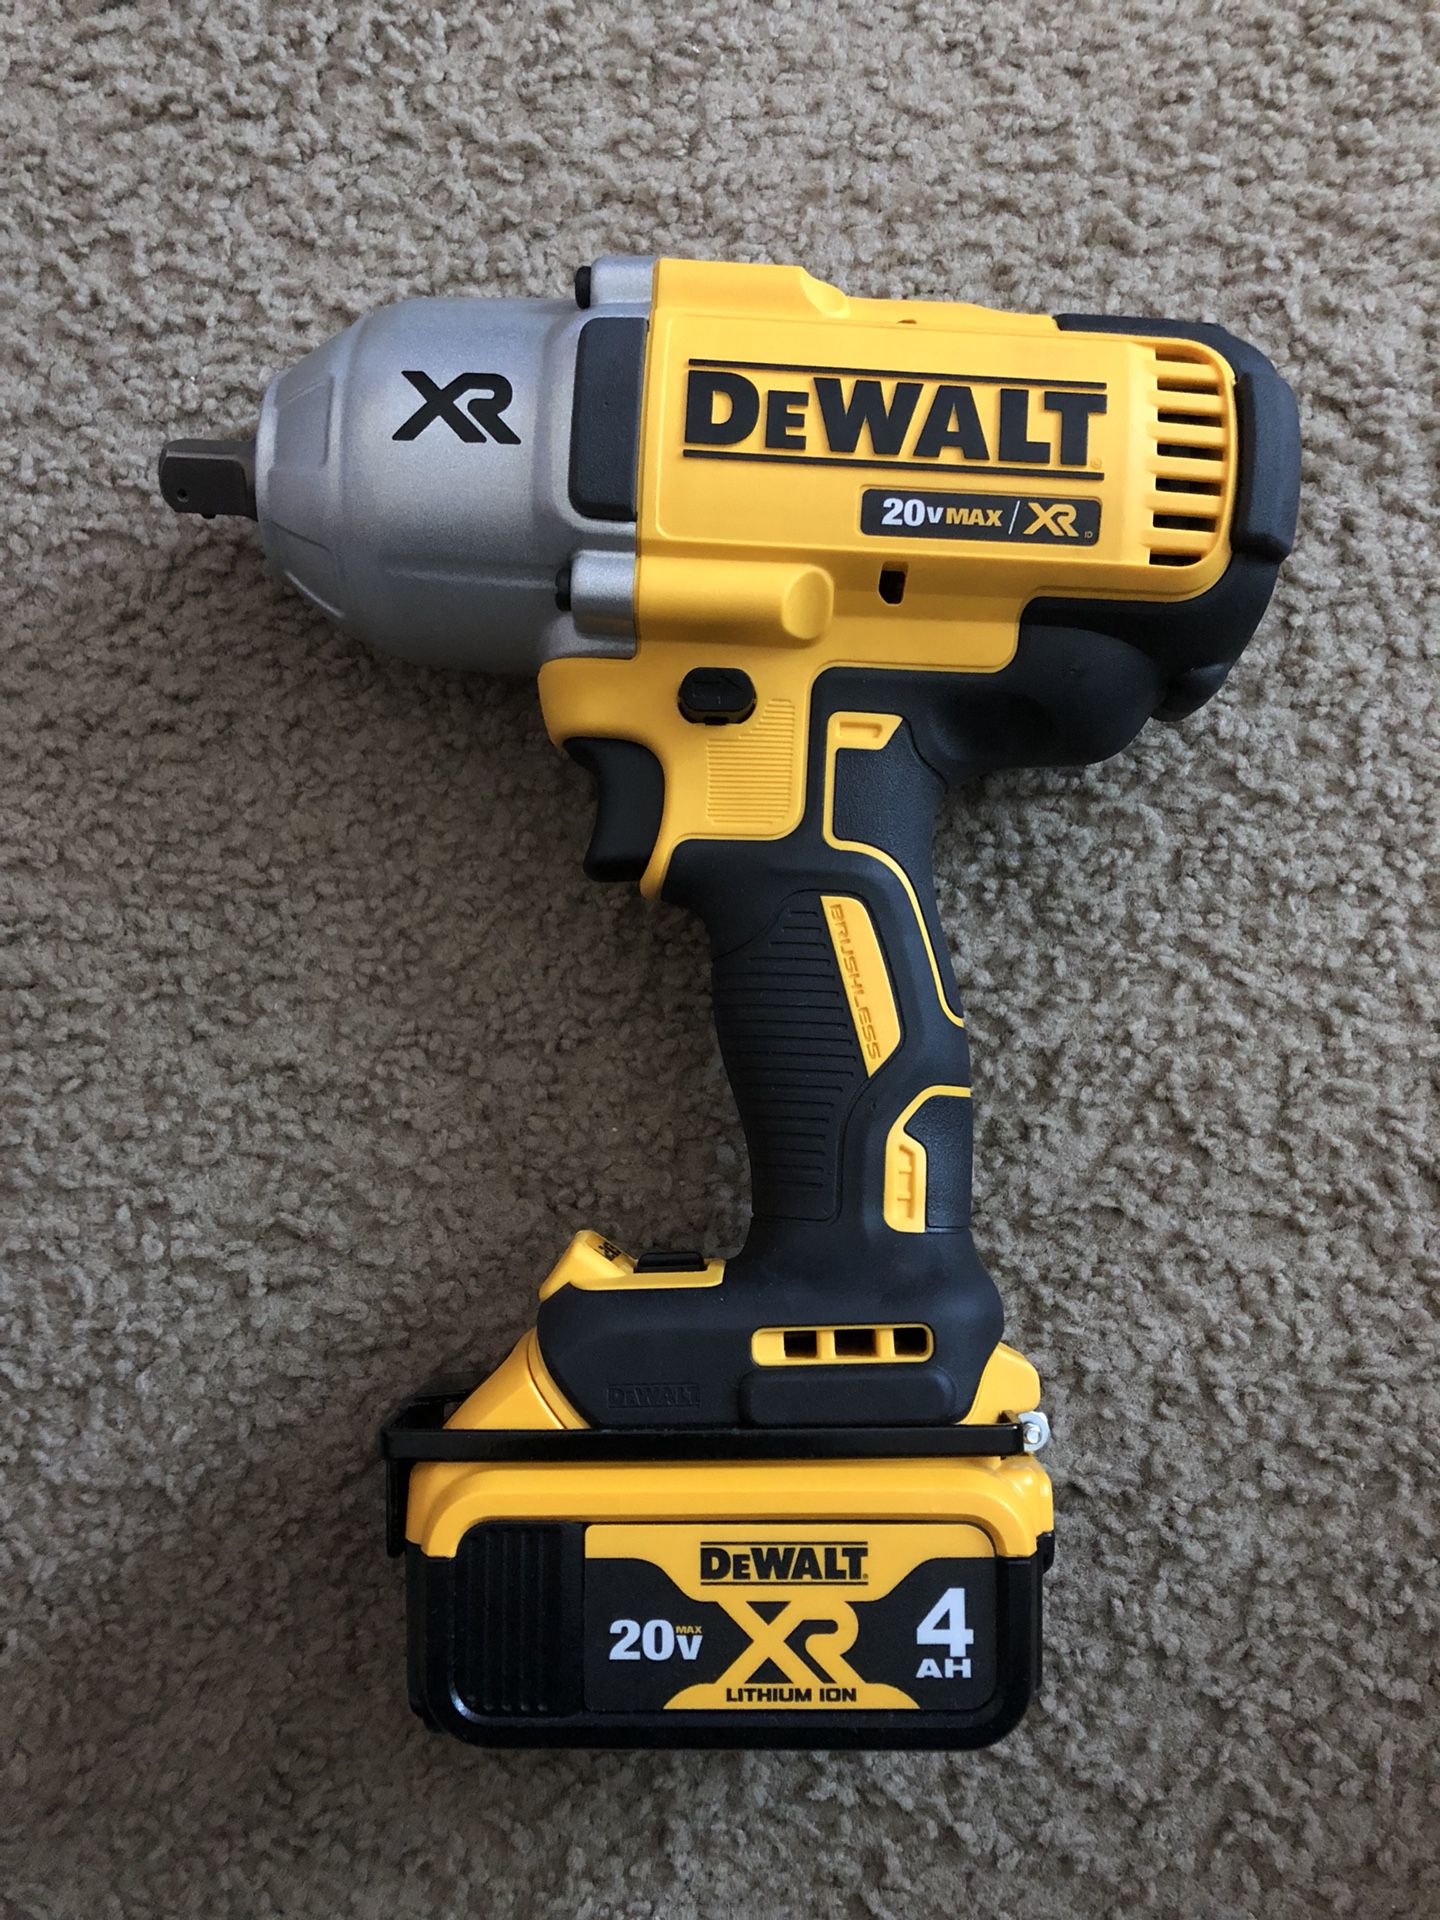 DeWalt DCF899 1/2 impact wrench Brushless motor (TOOL AND BATTERY)